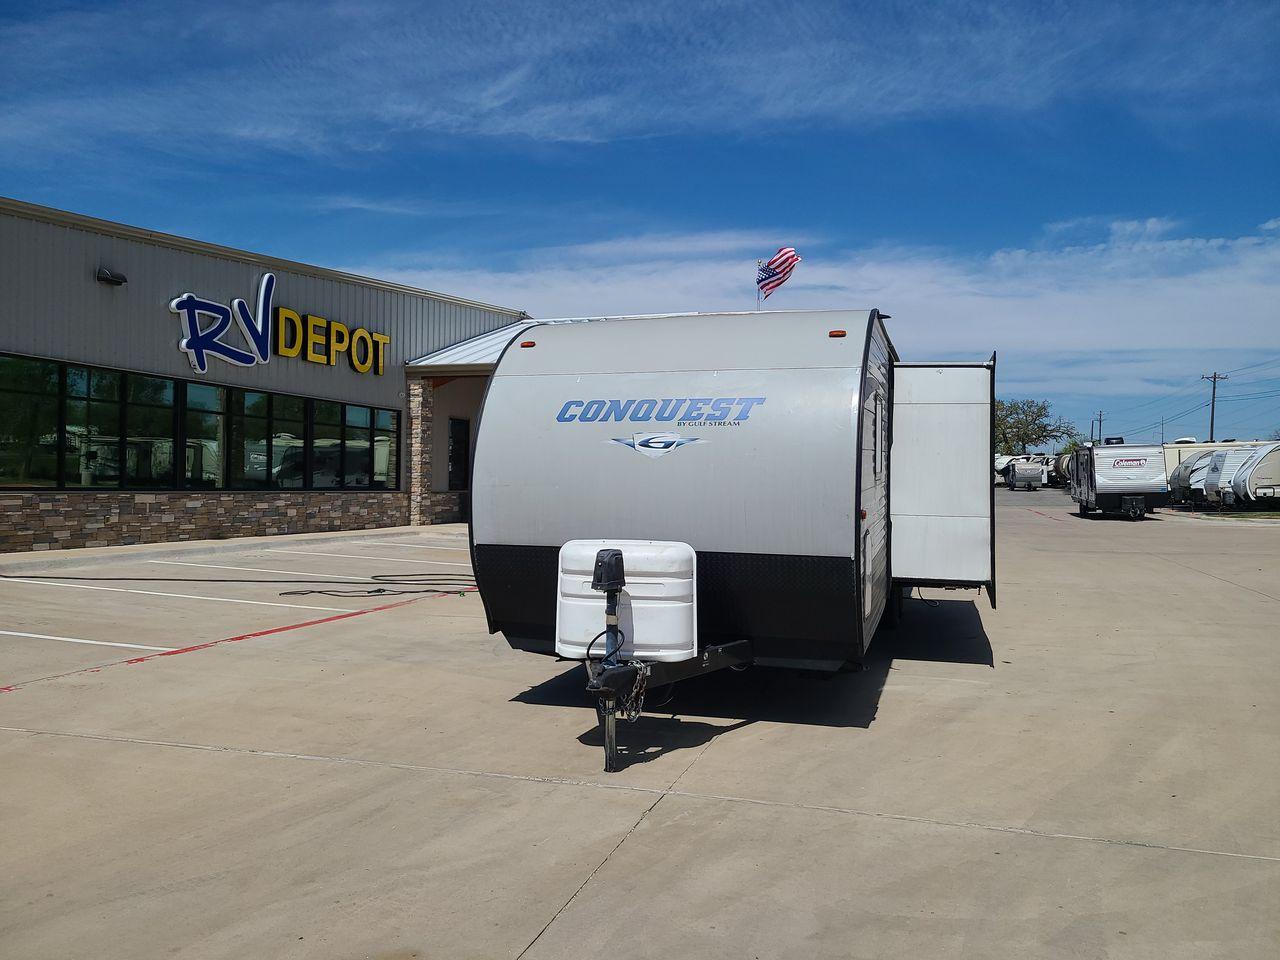 2018 WHITE GULF STREAM CONQUEST 274QB - (1NL1G322XJ1) , Length: 32.25 ft. | Dry Weight: 6,230 lbs. | Slides: 1 transmission, located at 4319 N Main Street, Cleburne, TX, 76033, (817) 221-0660, 32.435829, -97.384178 - Take advantage of the 2018 Gulf Stream Conquest 274QB Travel Trailer and enjoy camping with the family. This travel trailer offers a comfortable and convenient living area for your outdoor adventures, designed with comfort and convenience in mind. The measurements of this unit are 32.25 ft in len - Photo #0